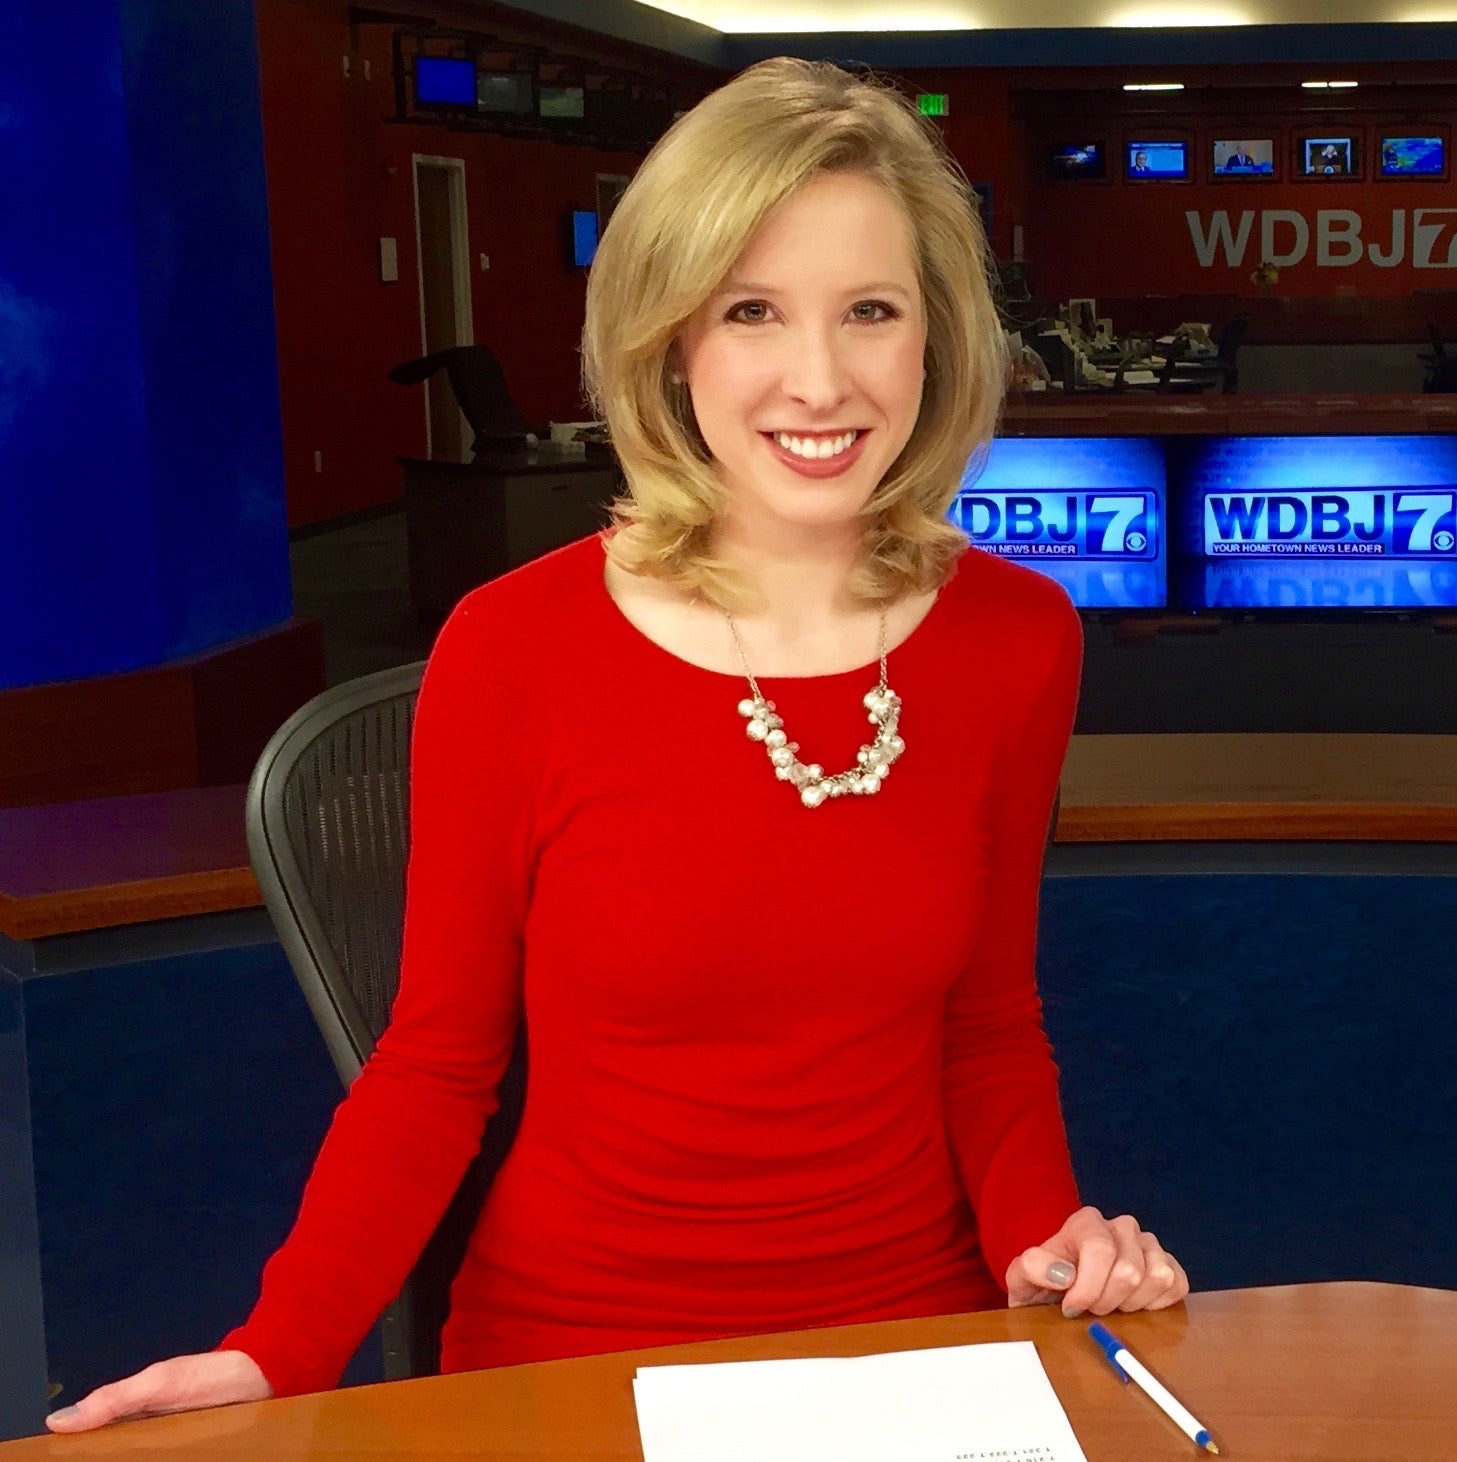 Alison Parker, 24, was a Virginia journalist shot dead in 2015 during a live broadcast